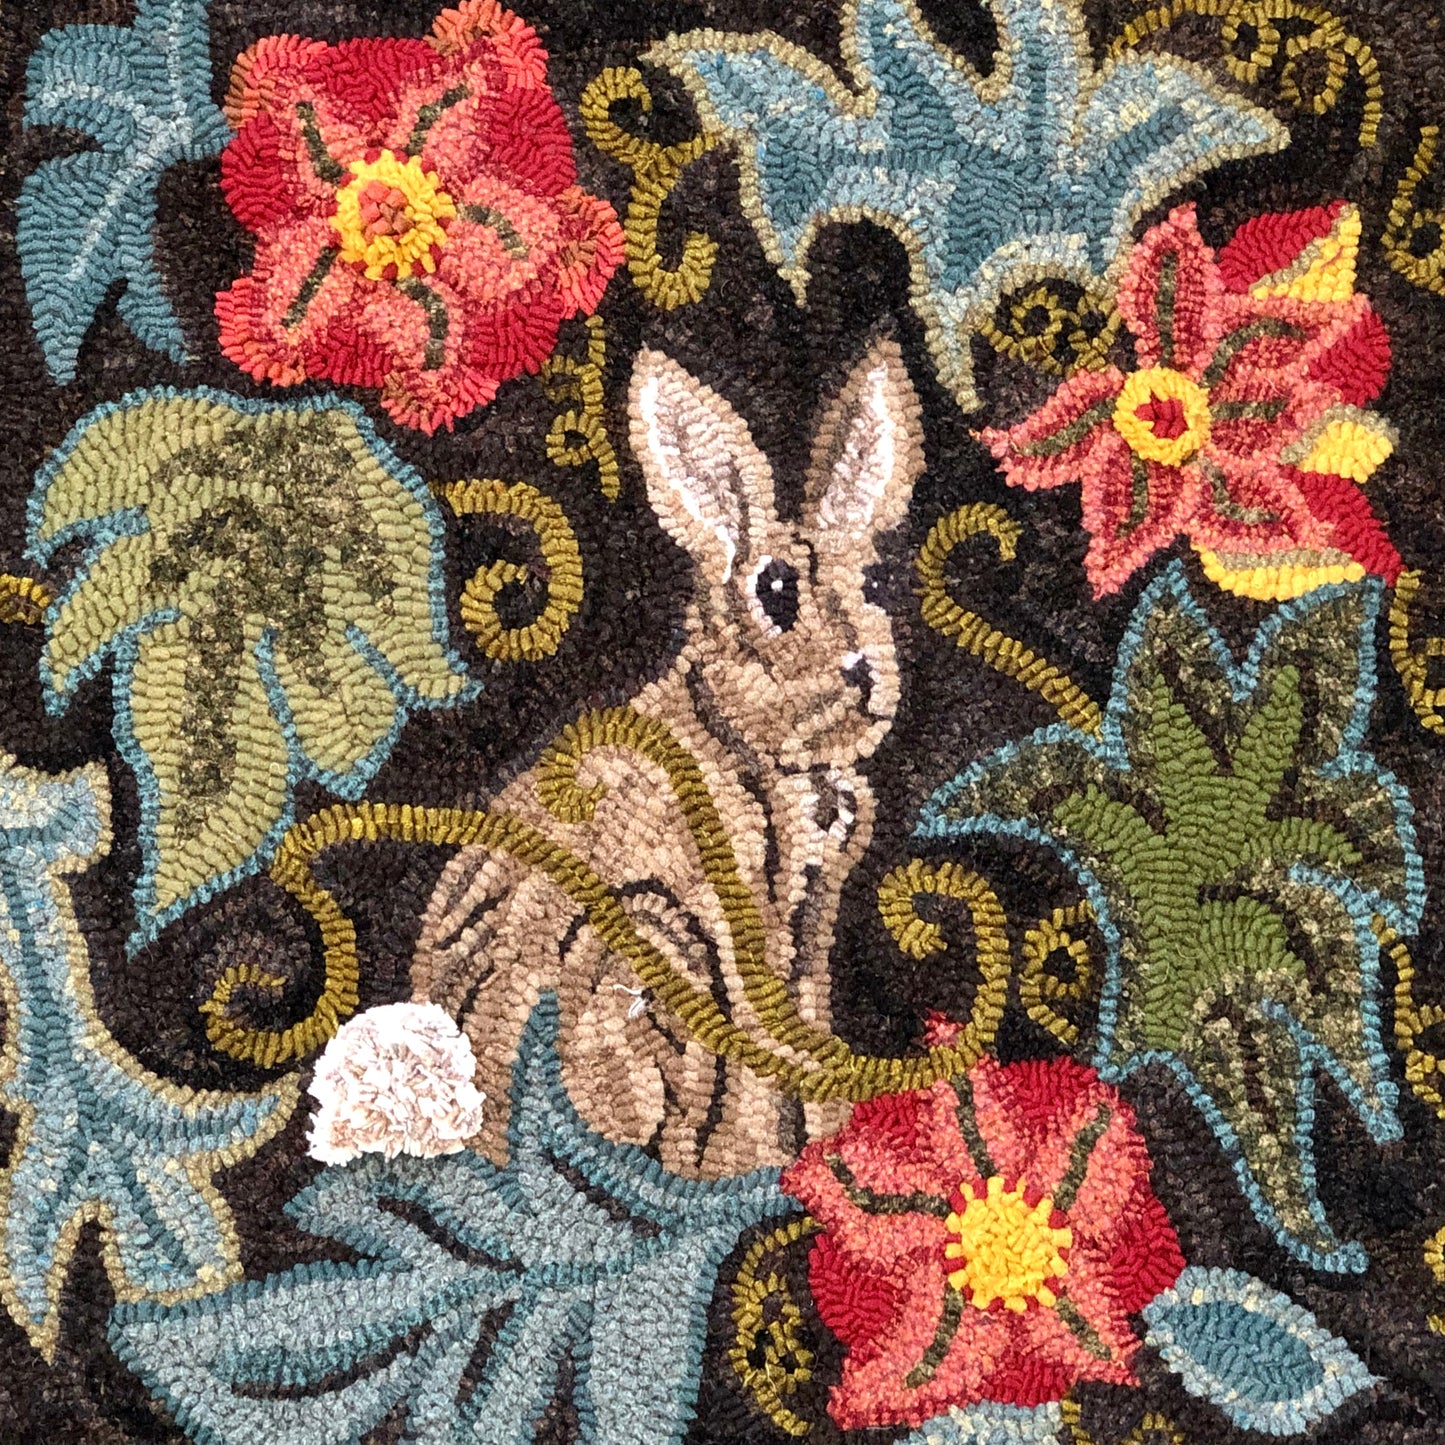 Garden Rabbit PDF Digital Download Rug Hooking Pattern, by Orphaned Wool. Beautiful Rabbit with Flowers and Leaves surrounding him. Perfect for rug hooking or rug punching with the Oxford punch Needle.